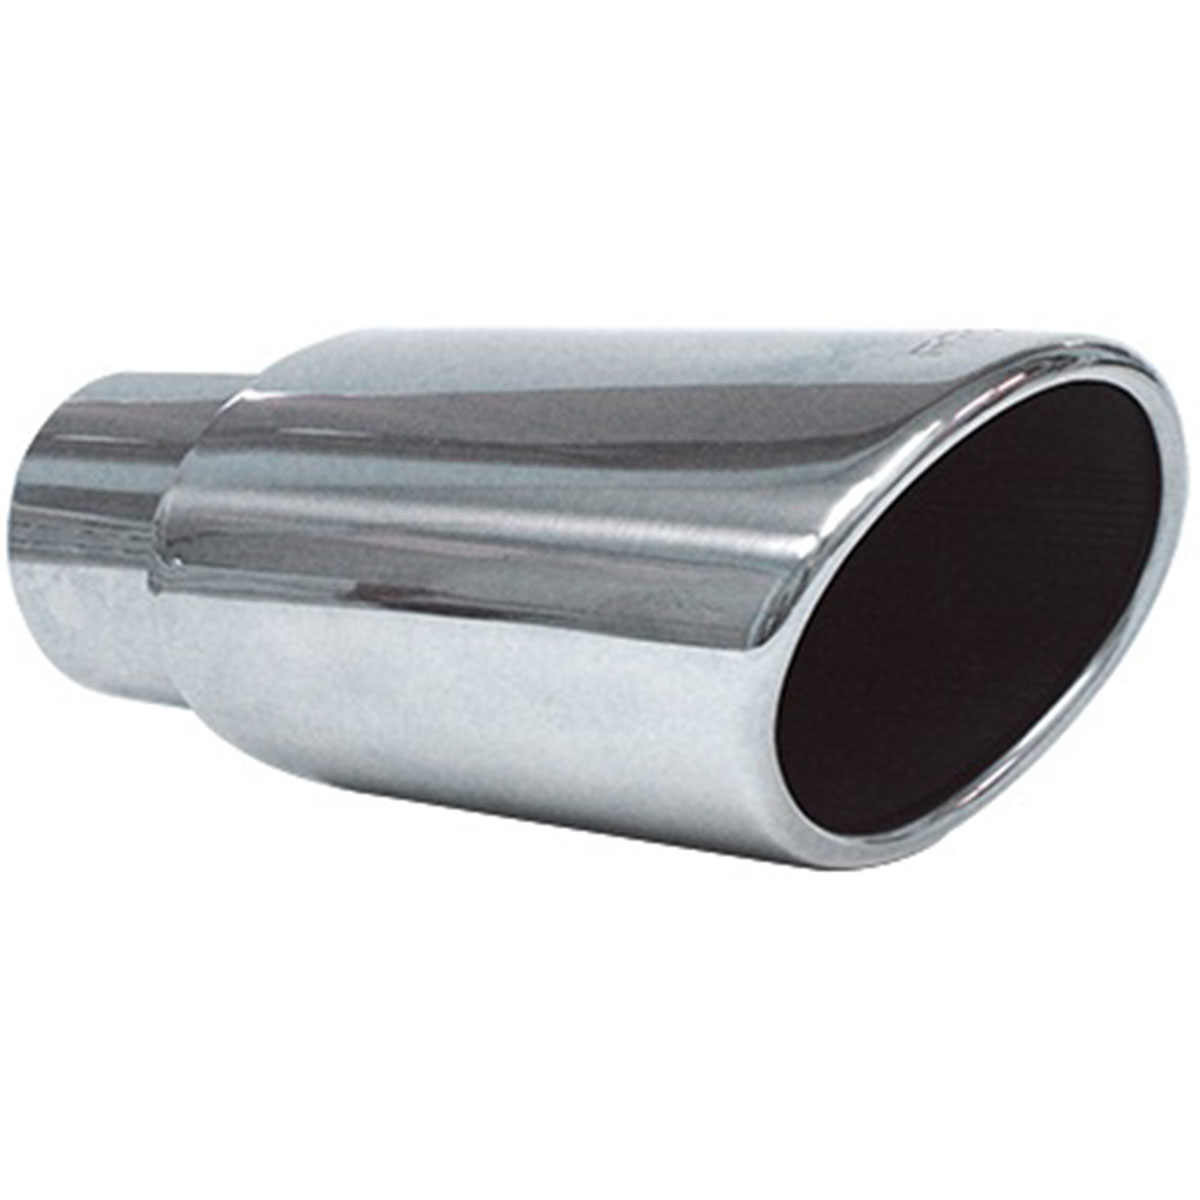 Stainless steel exhaust tip, oval rolled model Hs